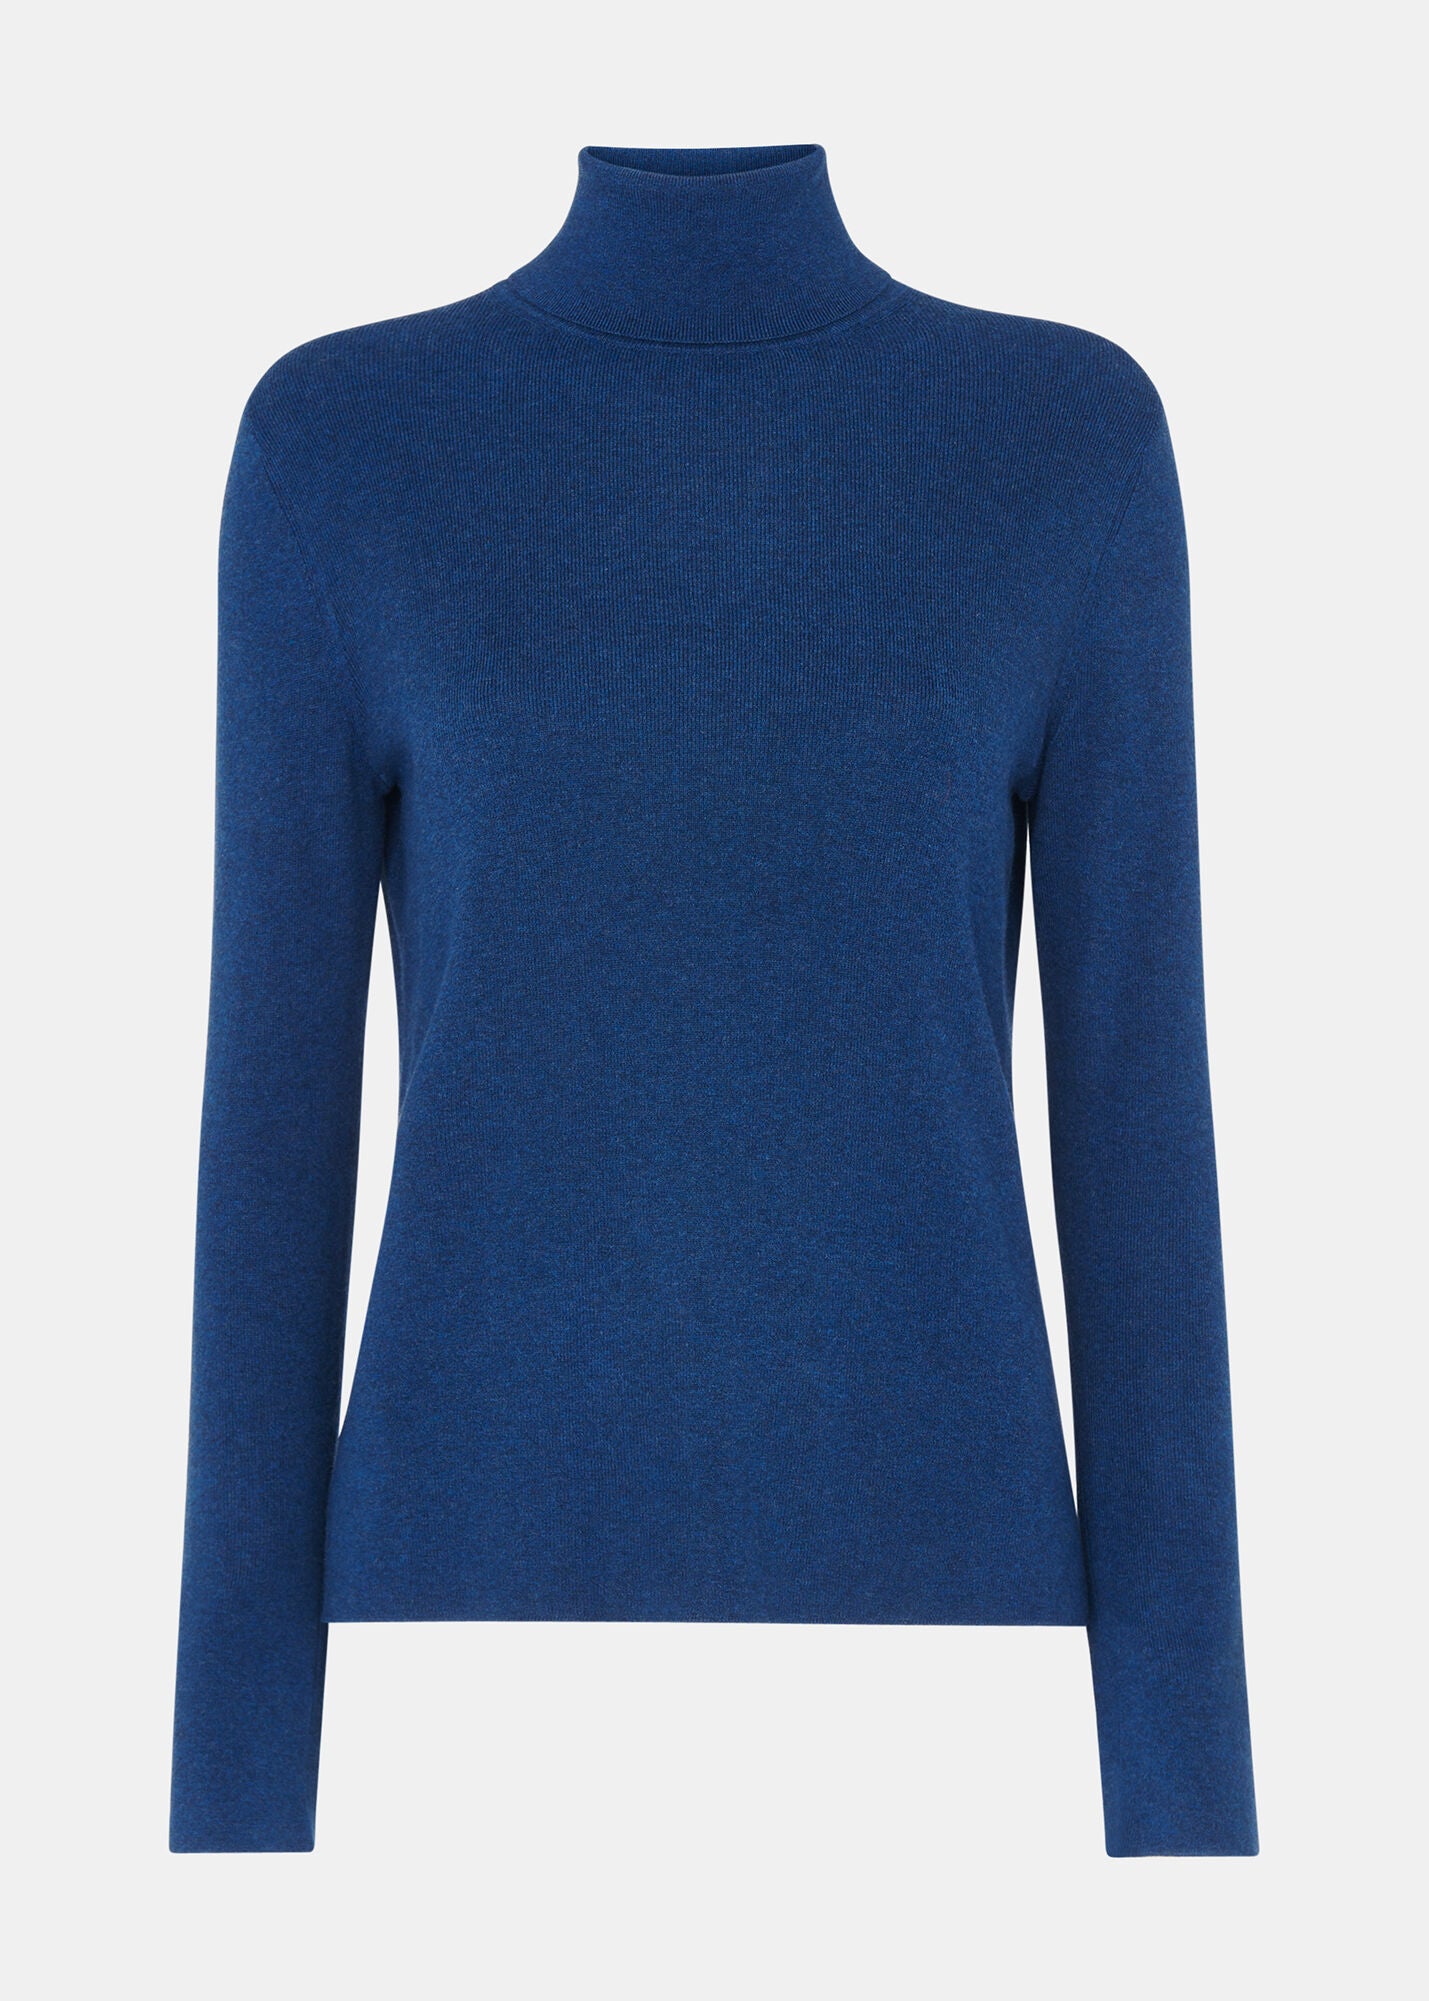 Maja Knitted Polo Neck Knit 37210 Blue